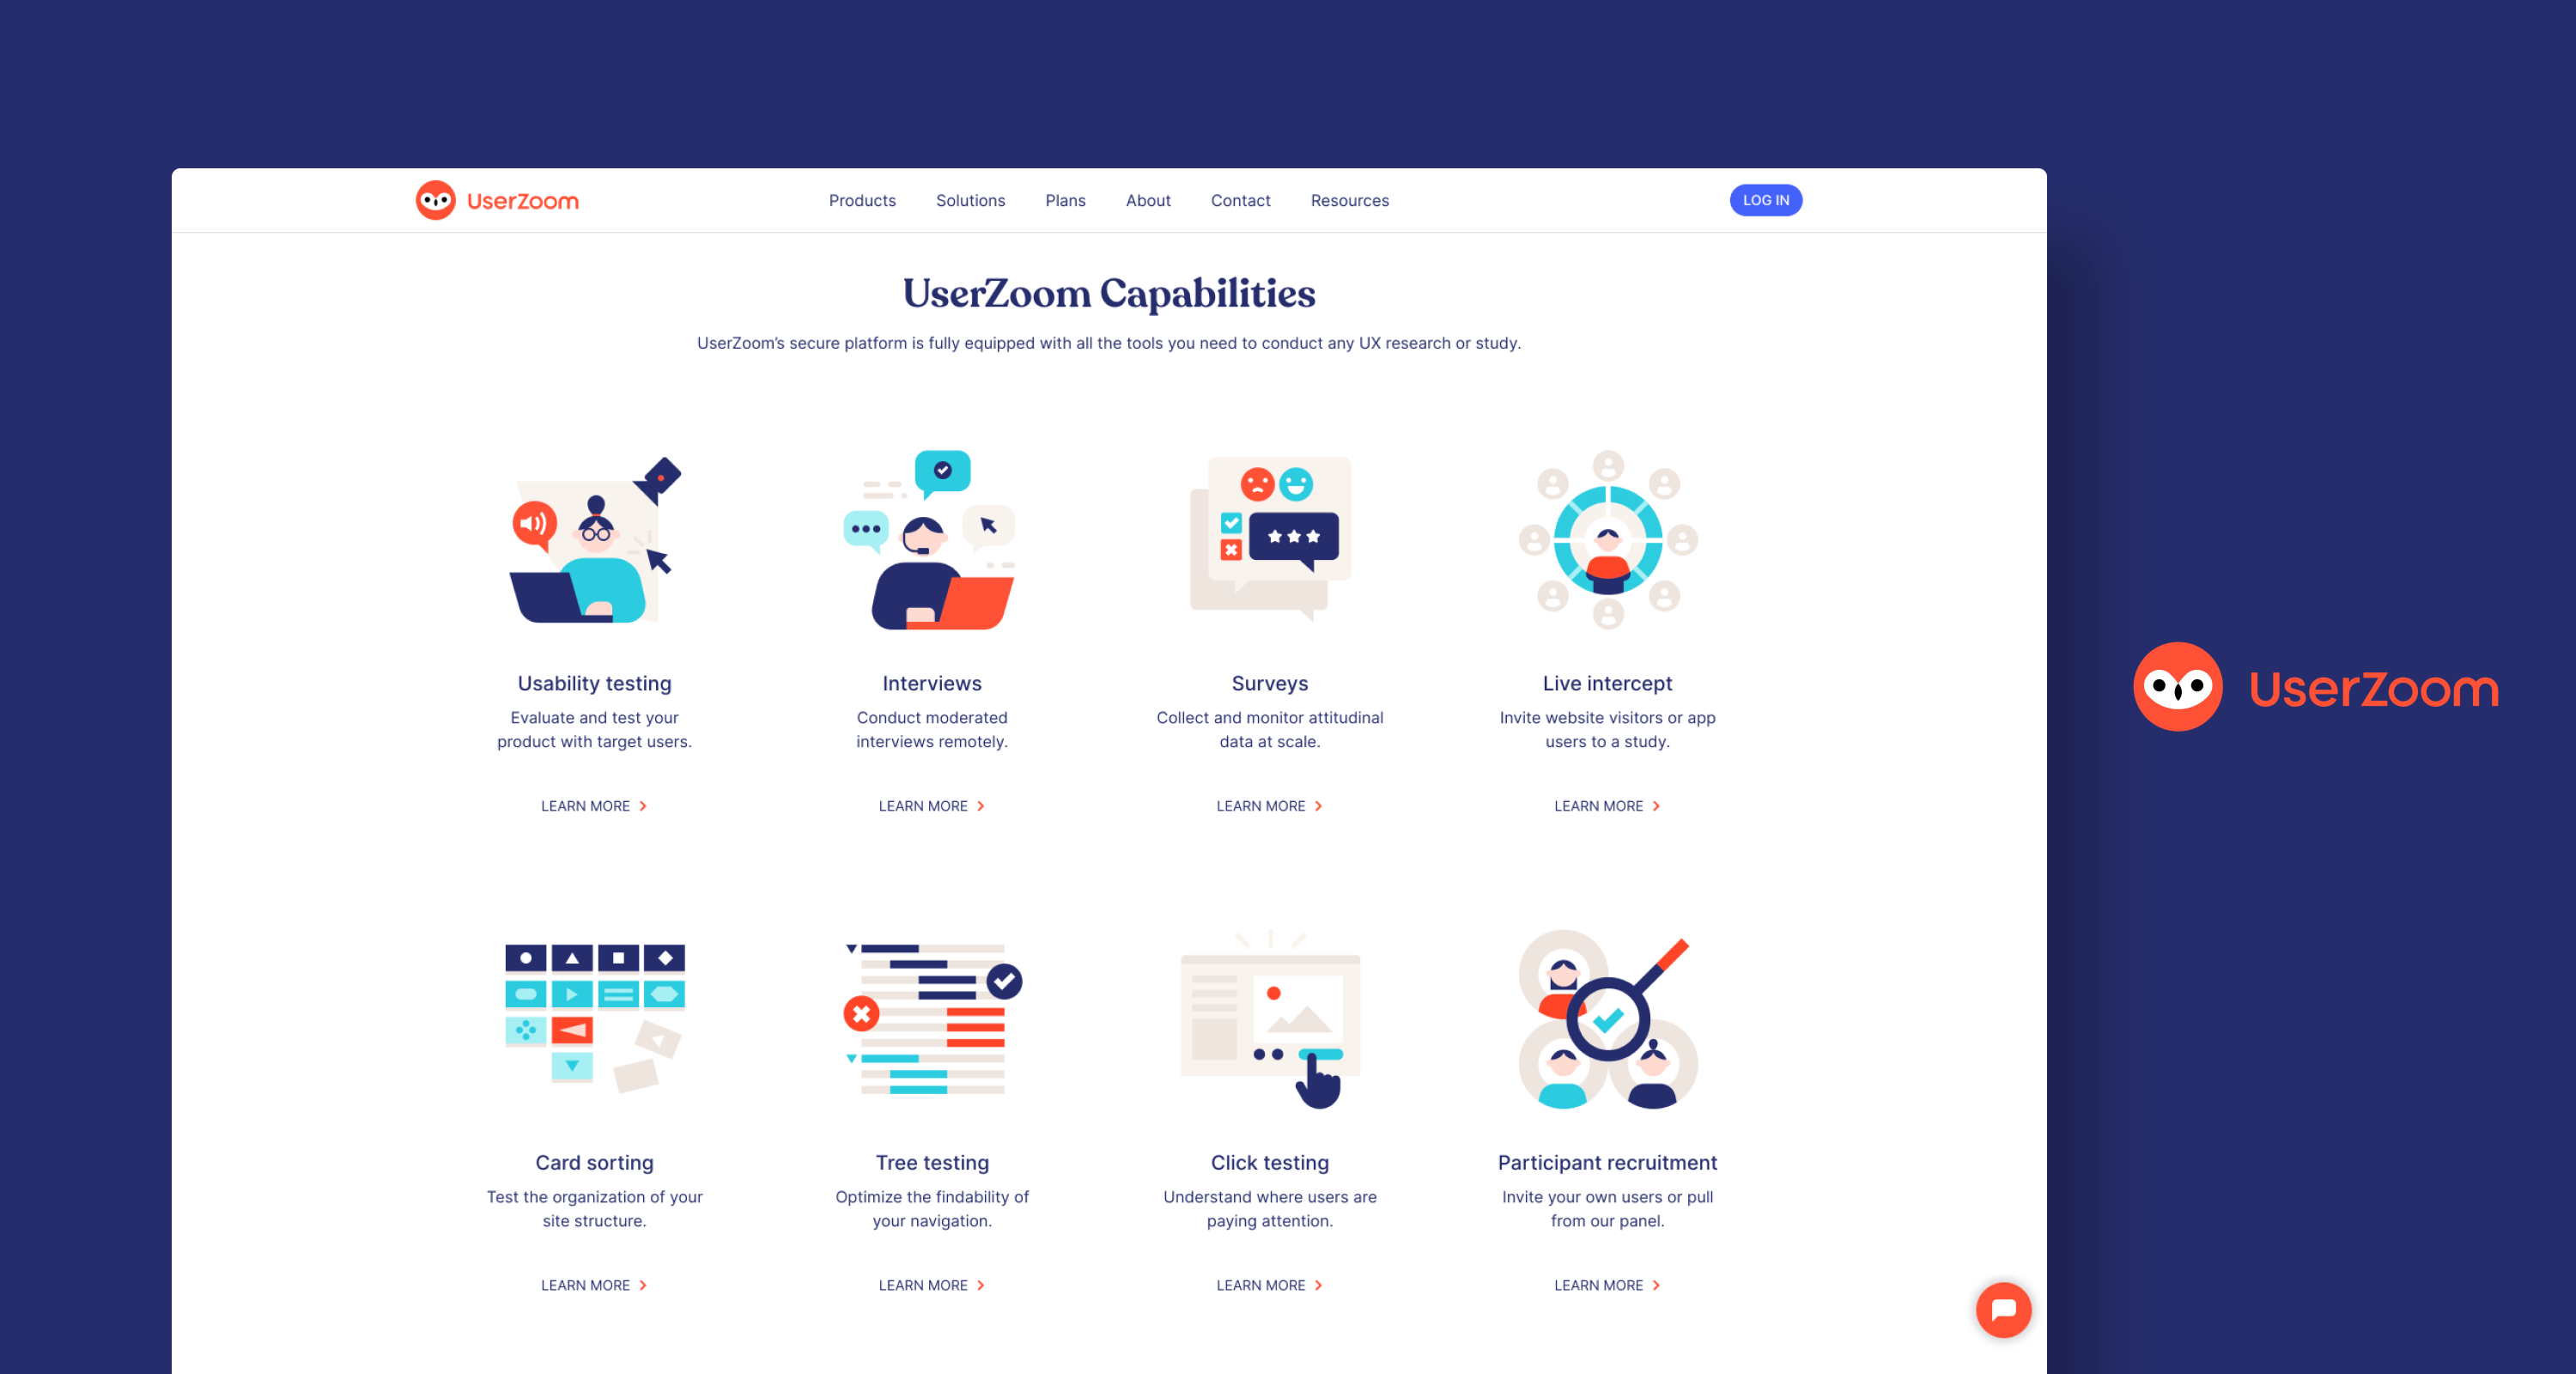 UserZoom UX research and testing platform